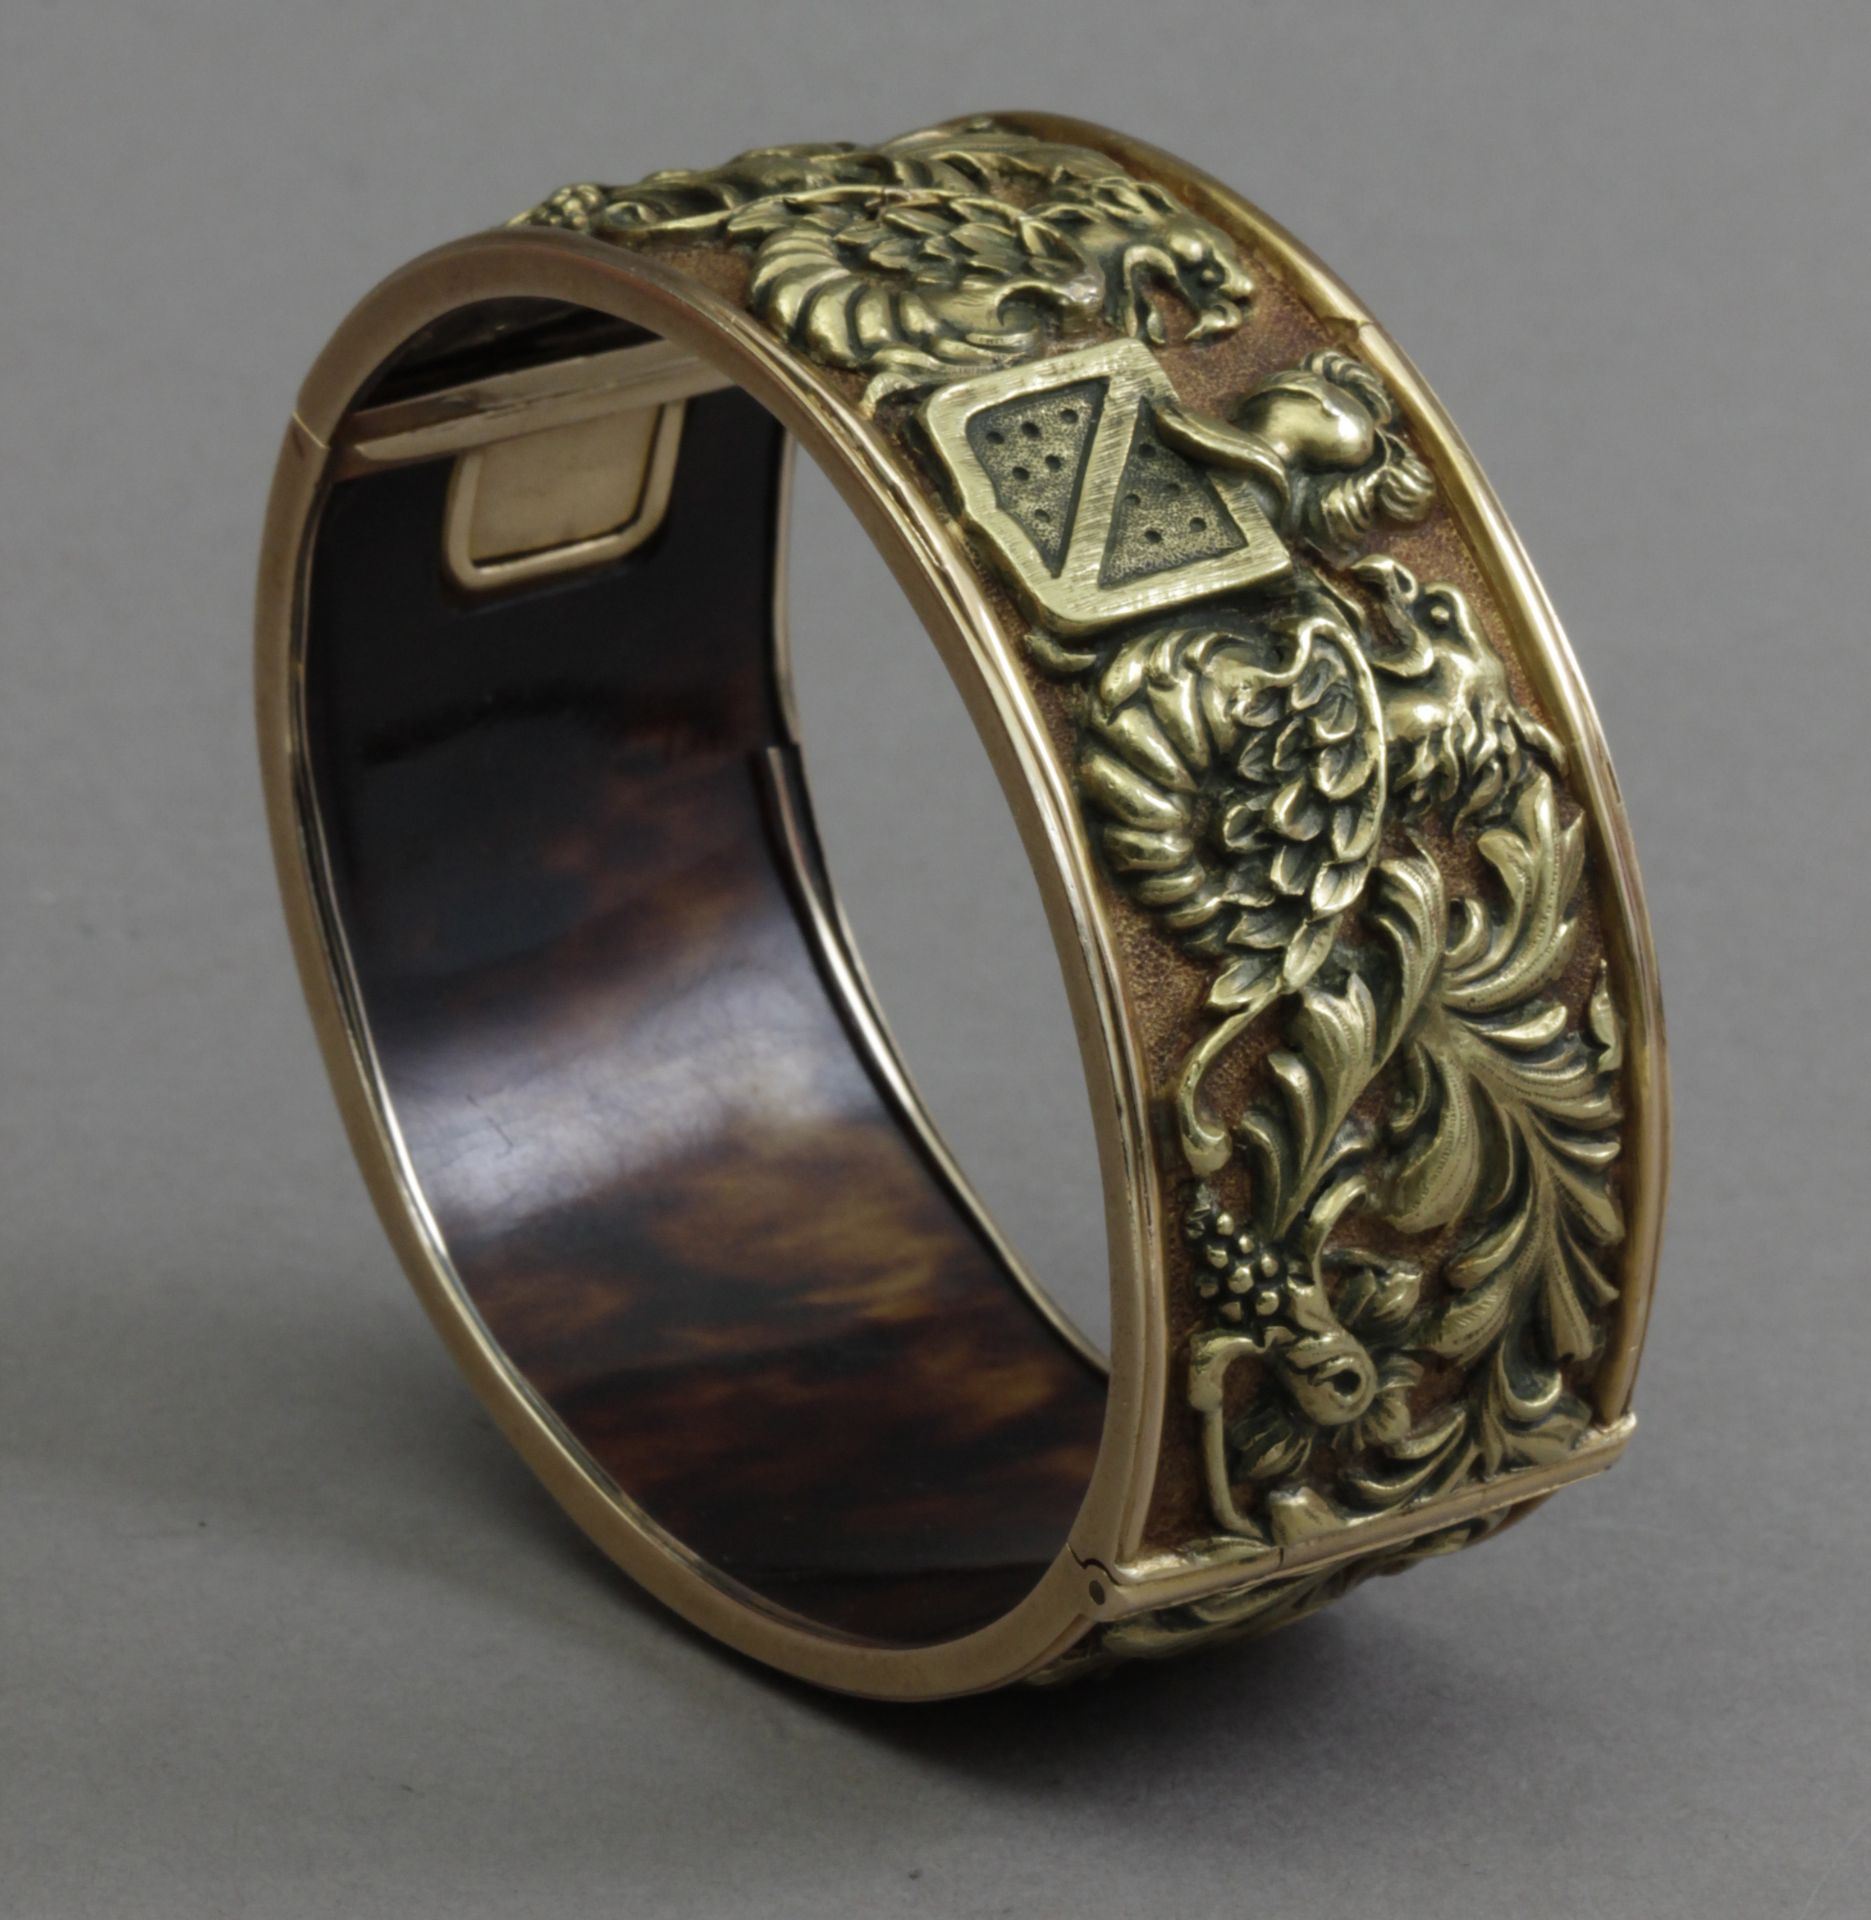 Possibly Fuset I Grau. A late 19th century bangle in 18k. yellow gold and tortoiseshell - Bild 4 aus 8